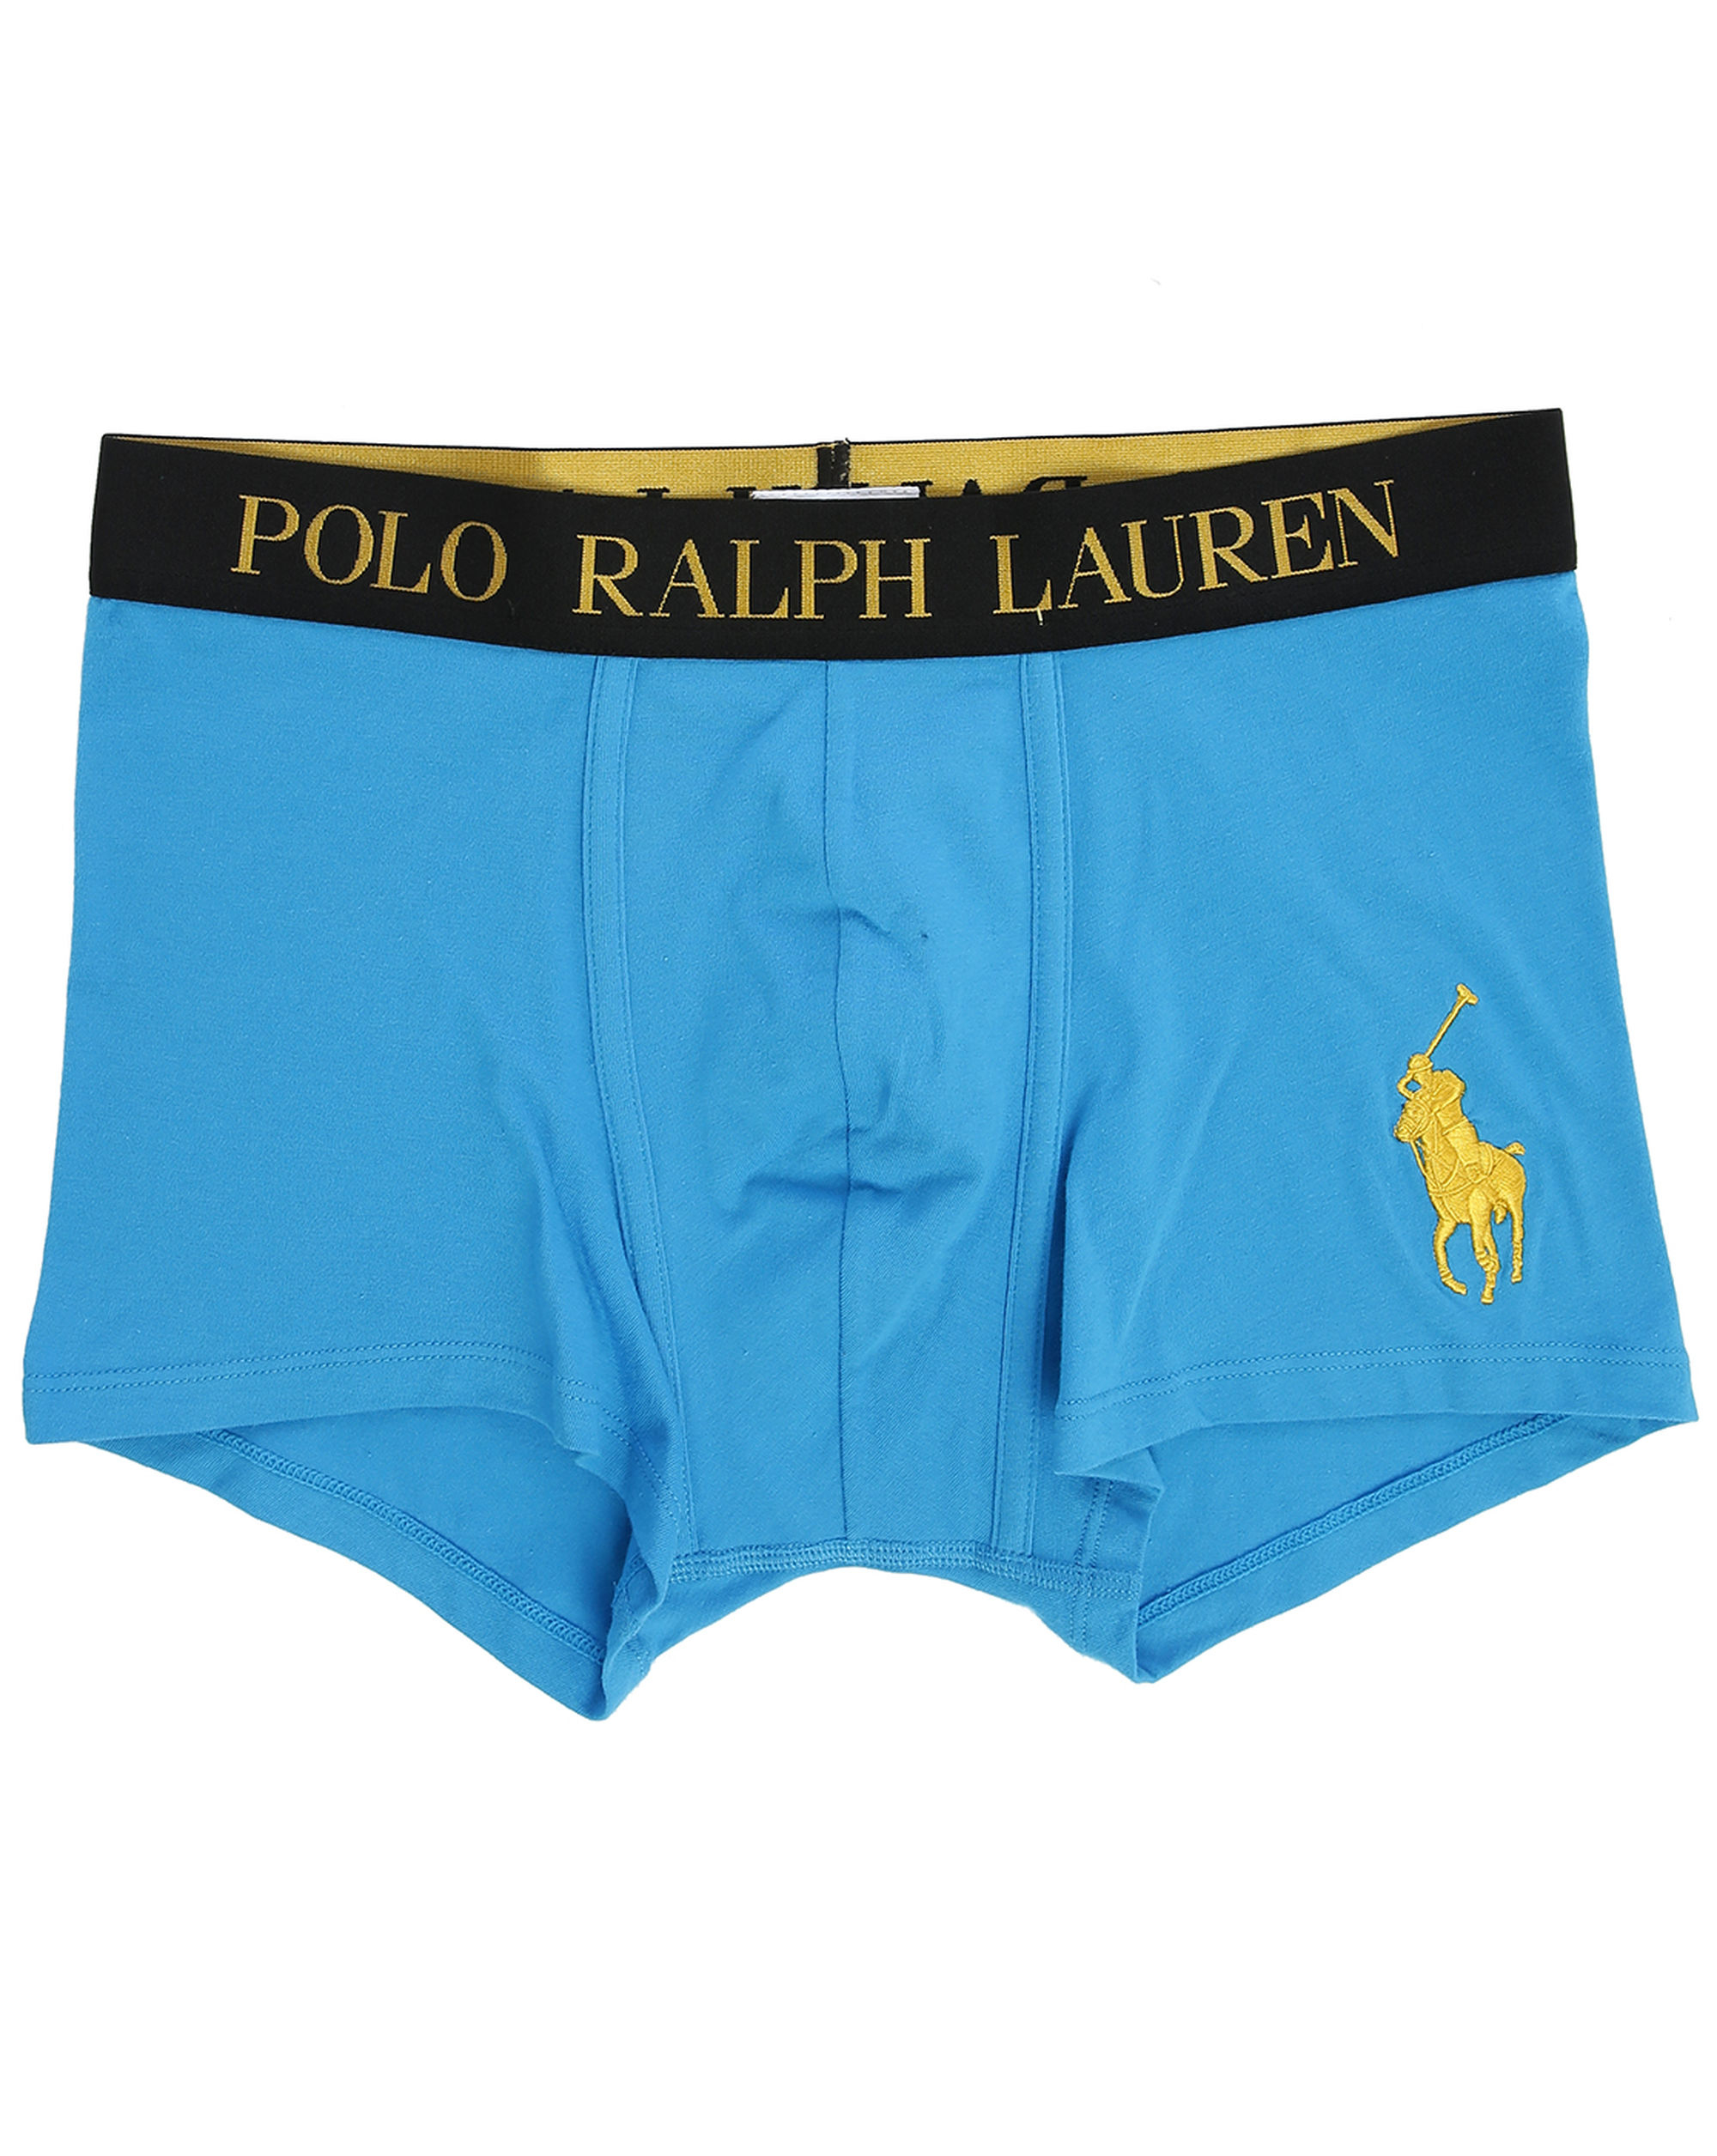 Polo ralph lauren Big Pony Gold Boxer Shorts With Turquoise Logo in ...